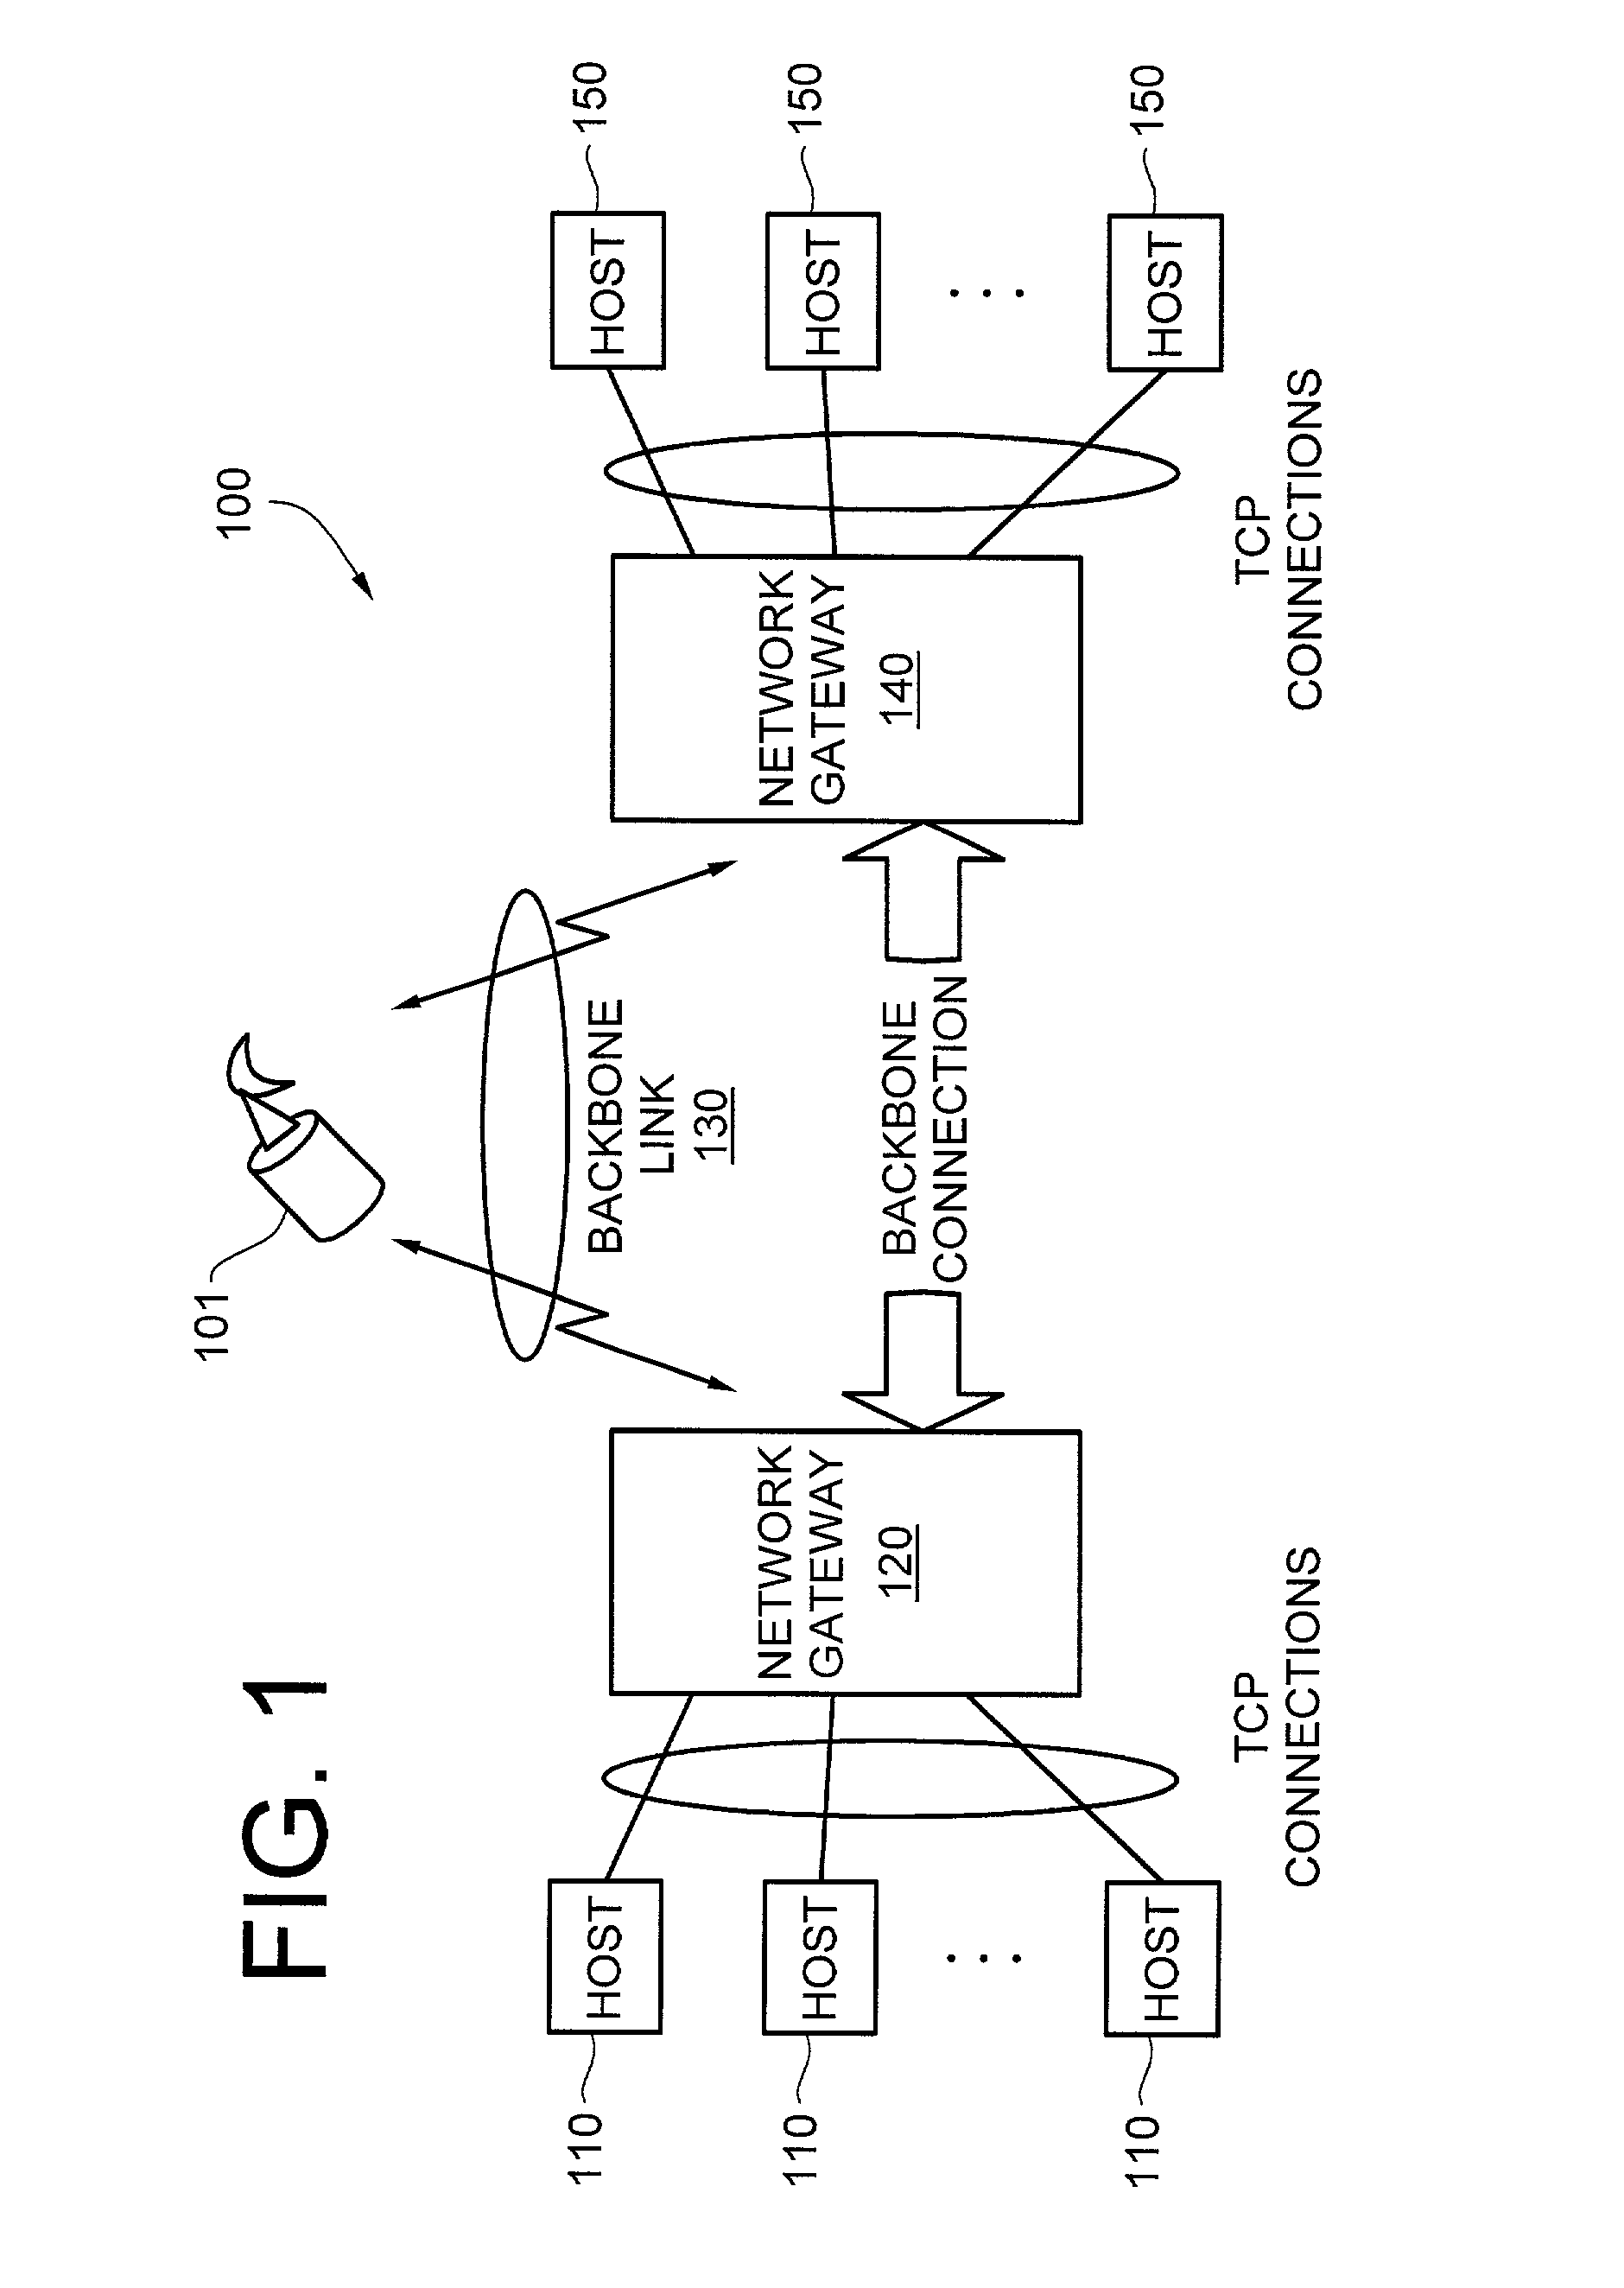 Method and system for improving network performance by utilizing path selection, path activation, and profiles